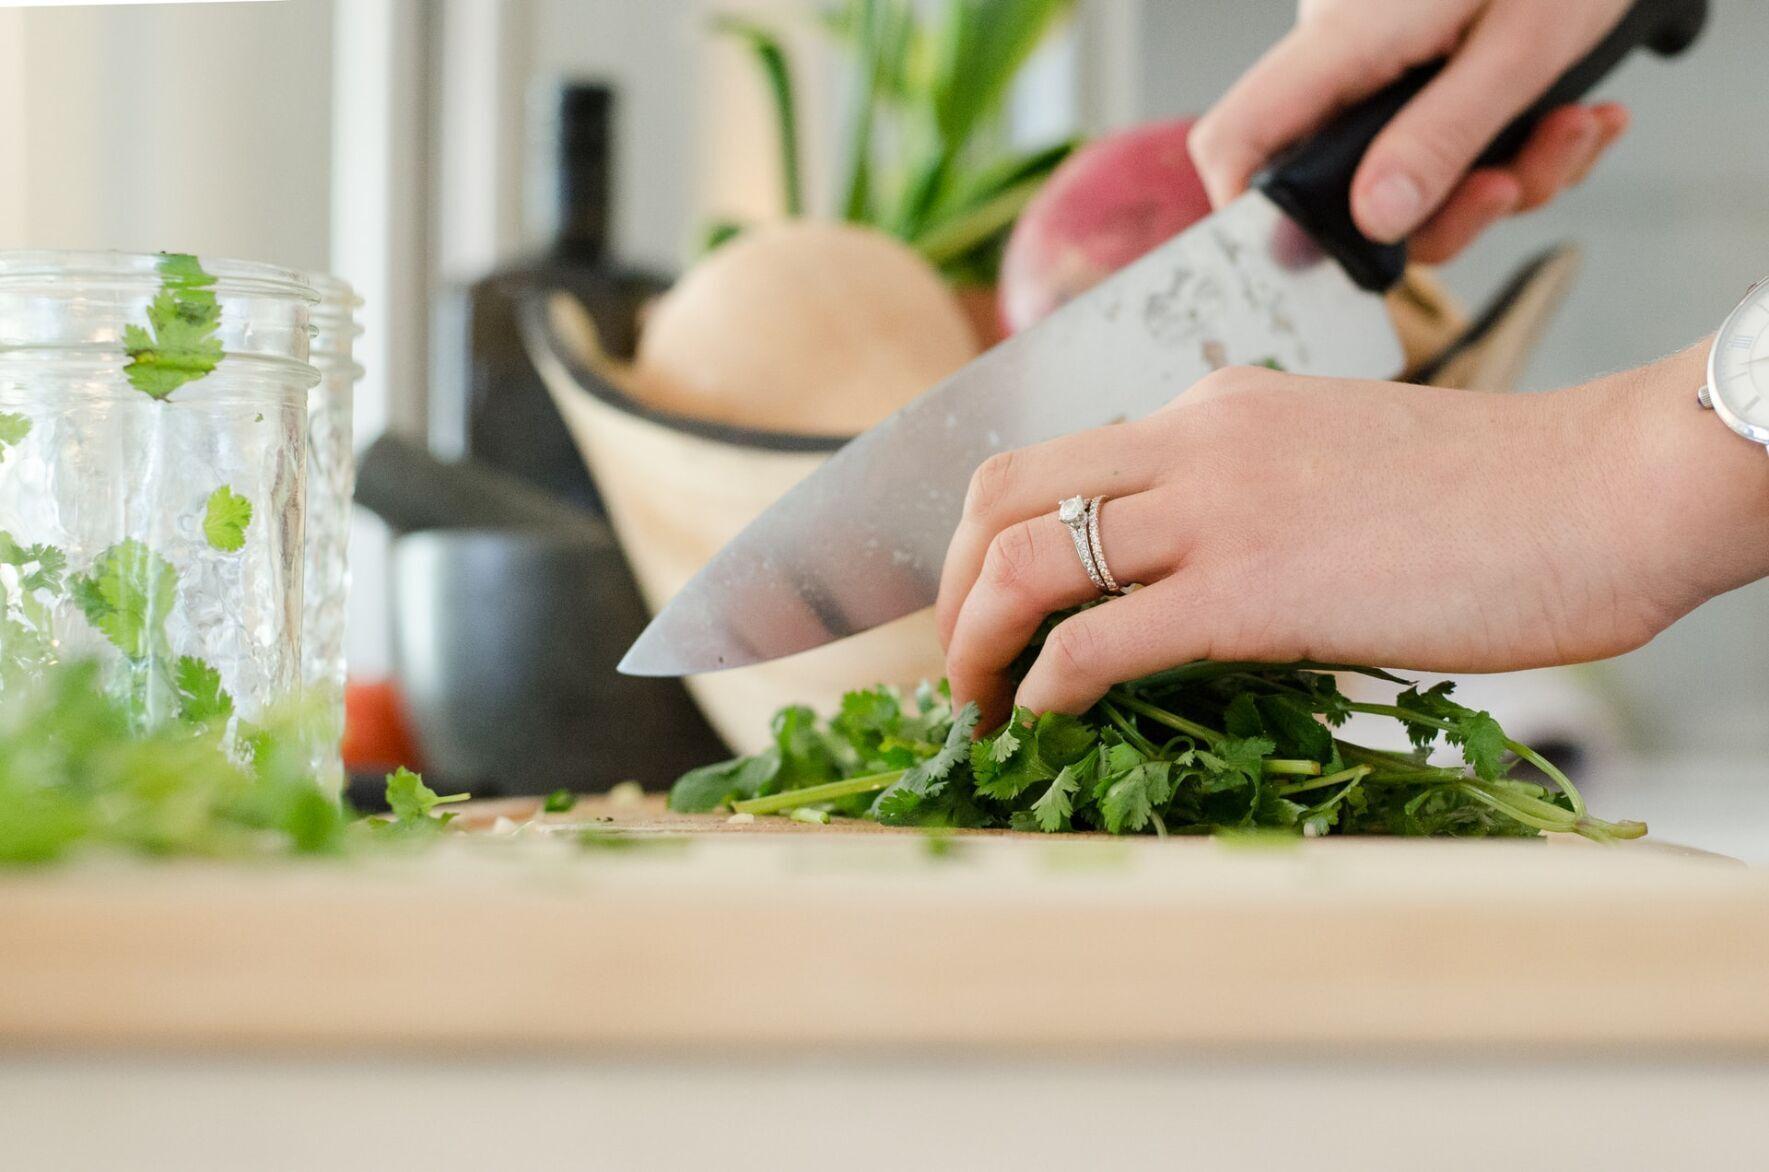 Want to cook like a chef? Follow these tips from TikTok